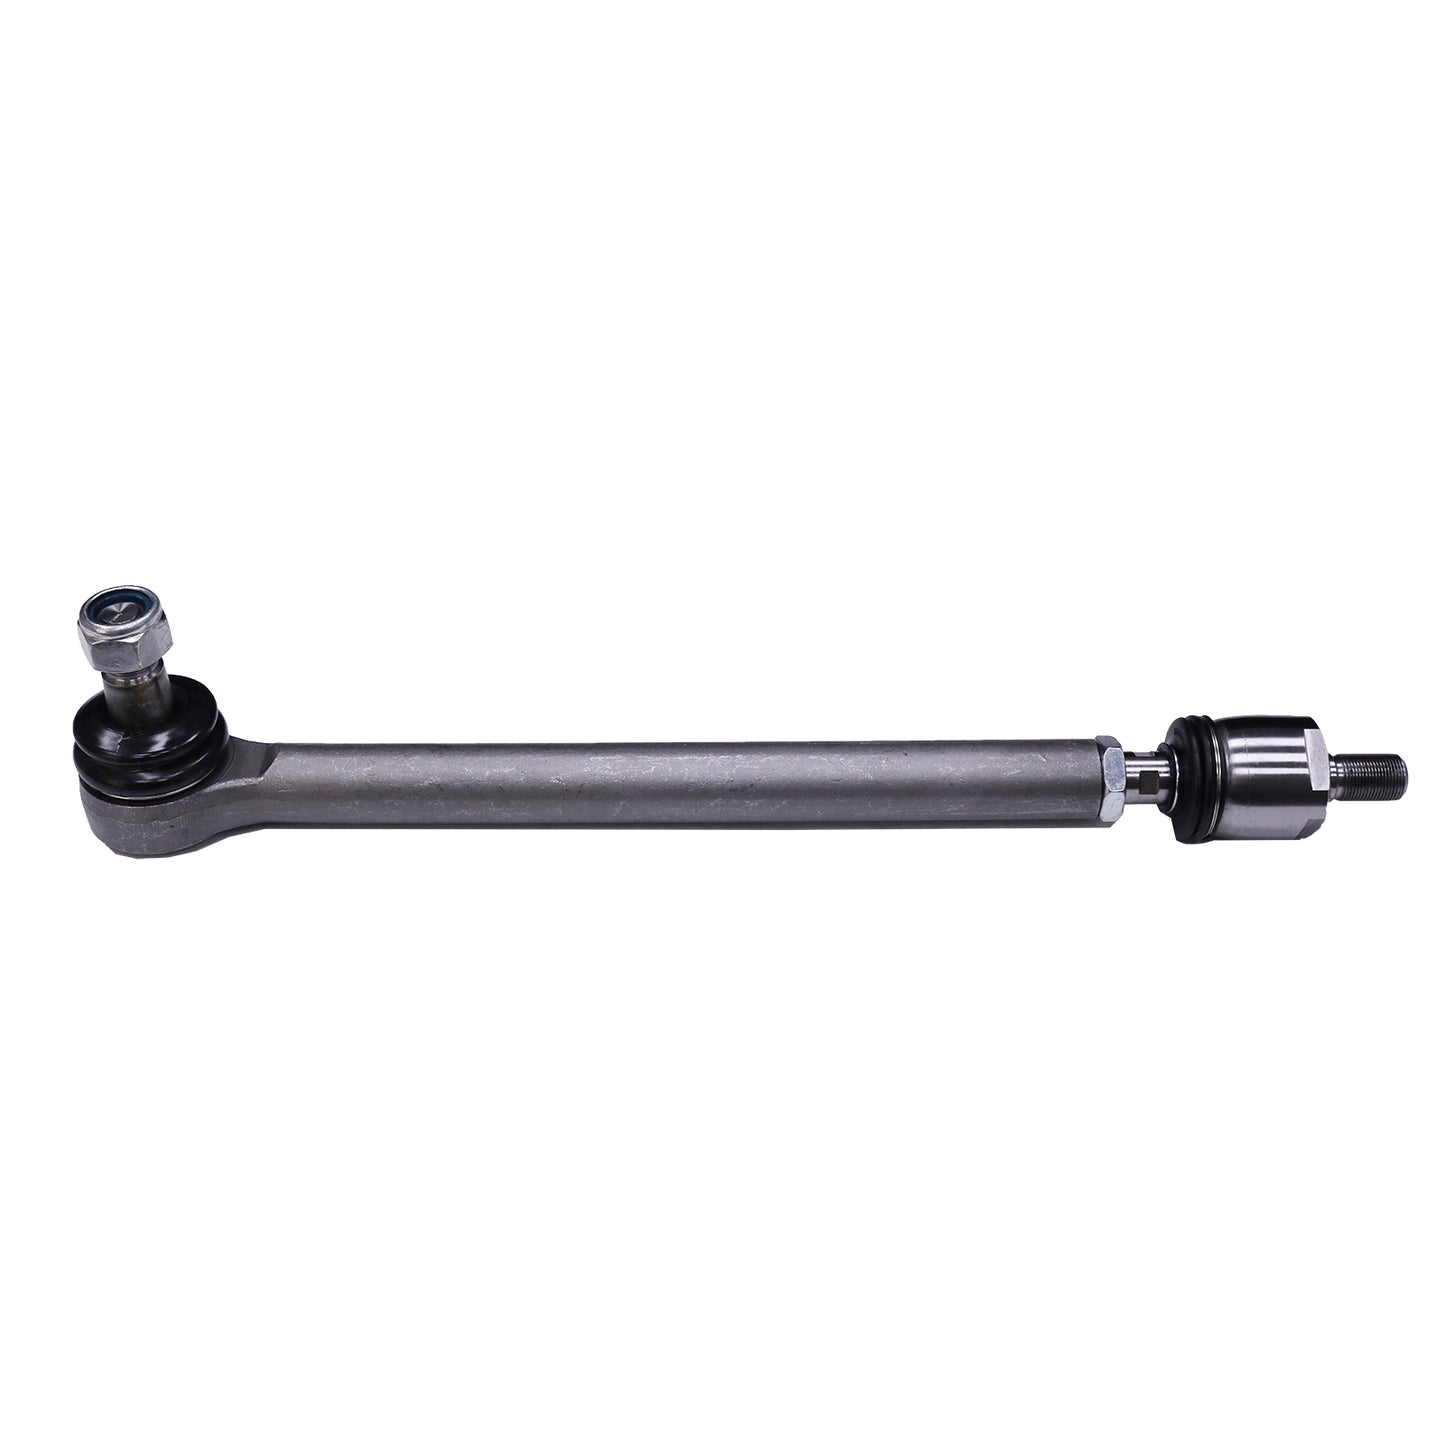 New 10062907 212.24.621.29 24" Tie Rod Compatible with Dana 212/149, 212/150, 212/182, 212/183